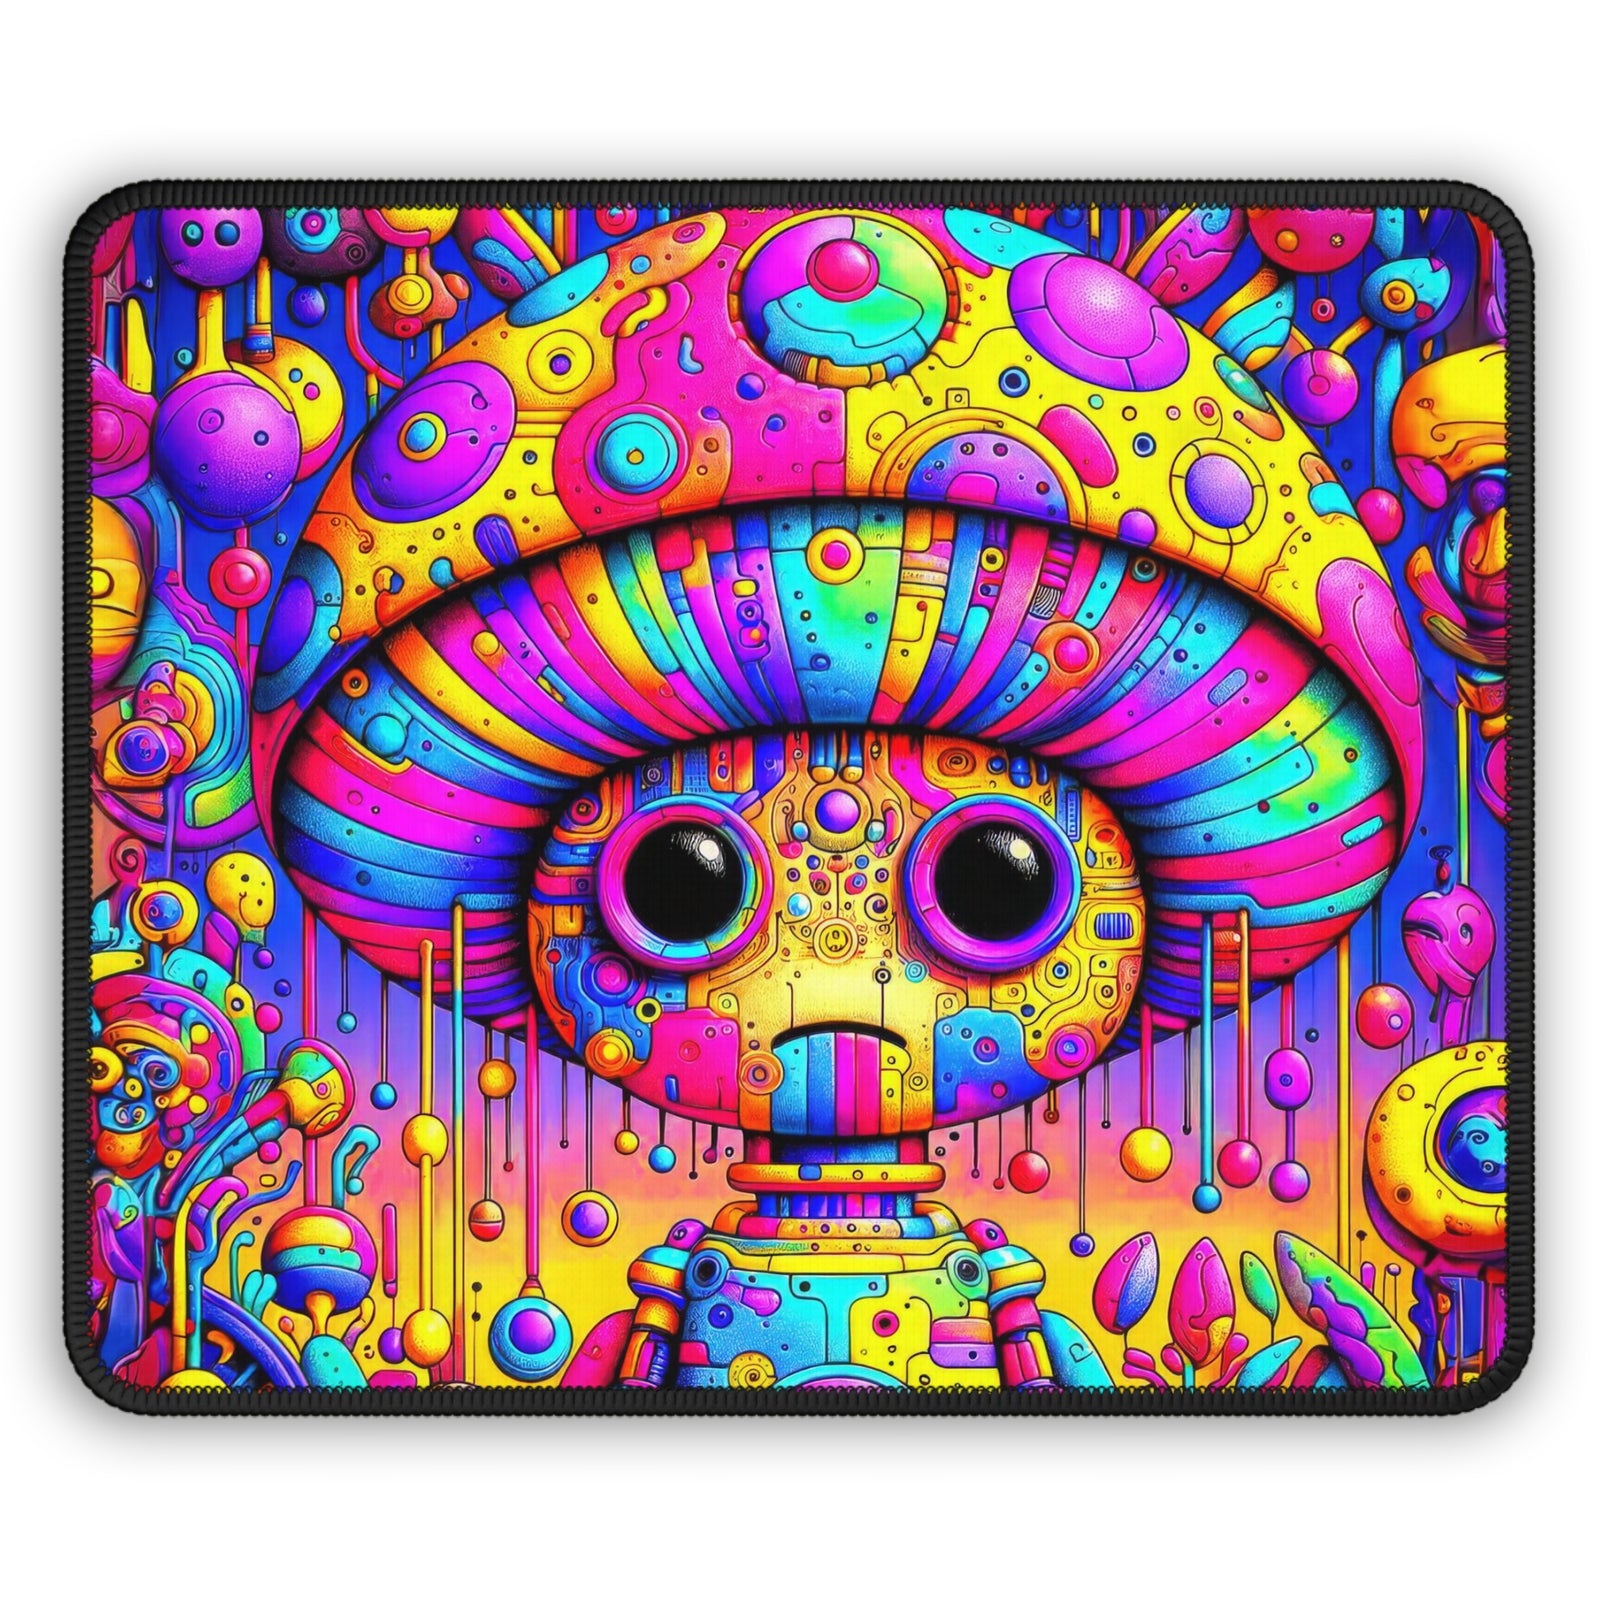 The Cosmic Marionette Gaming Mouse Pad